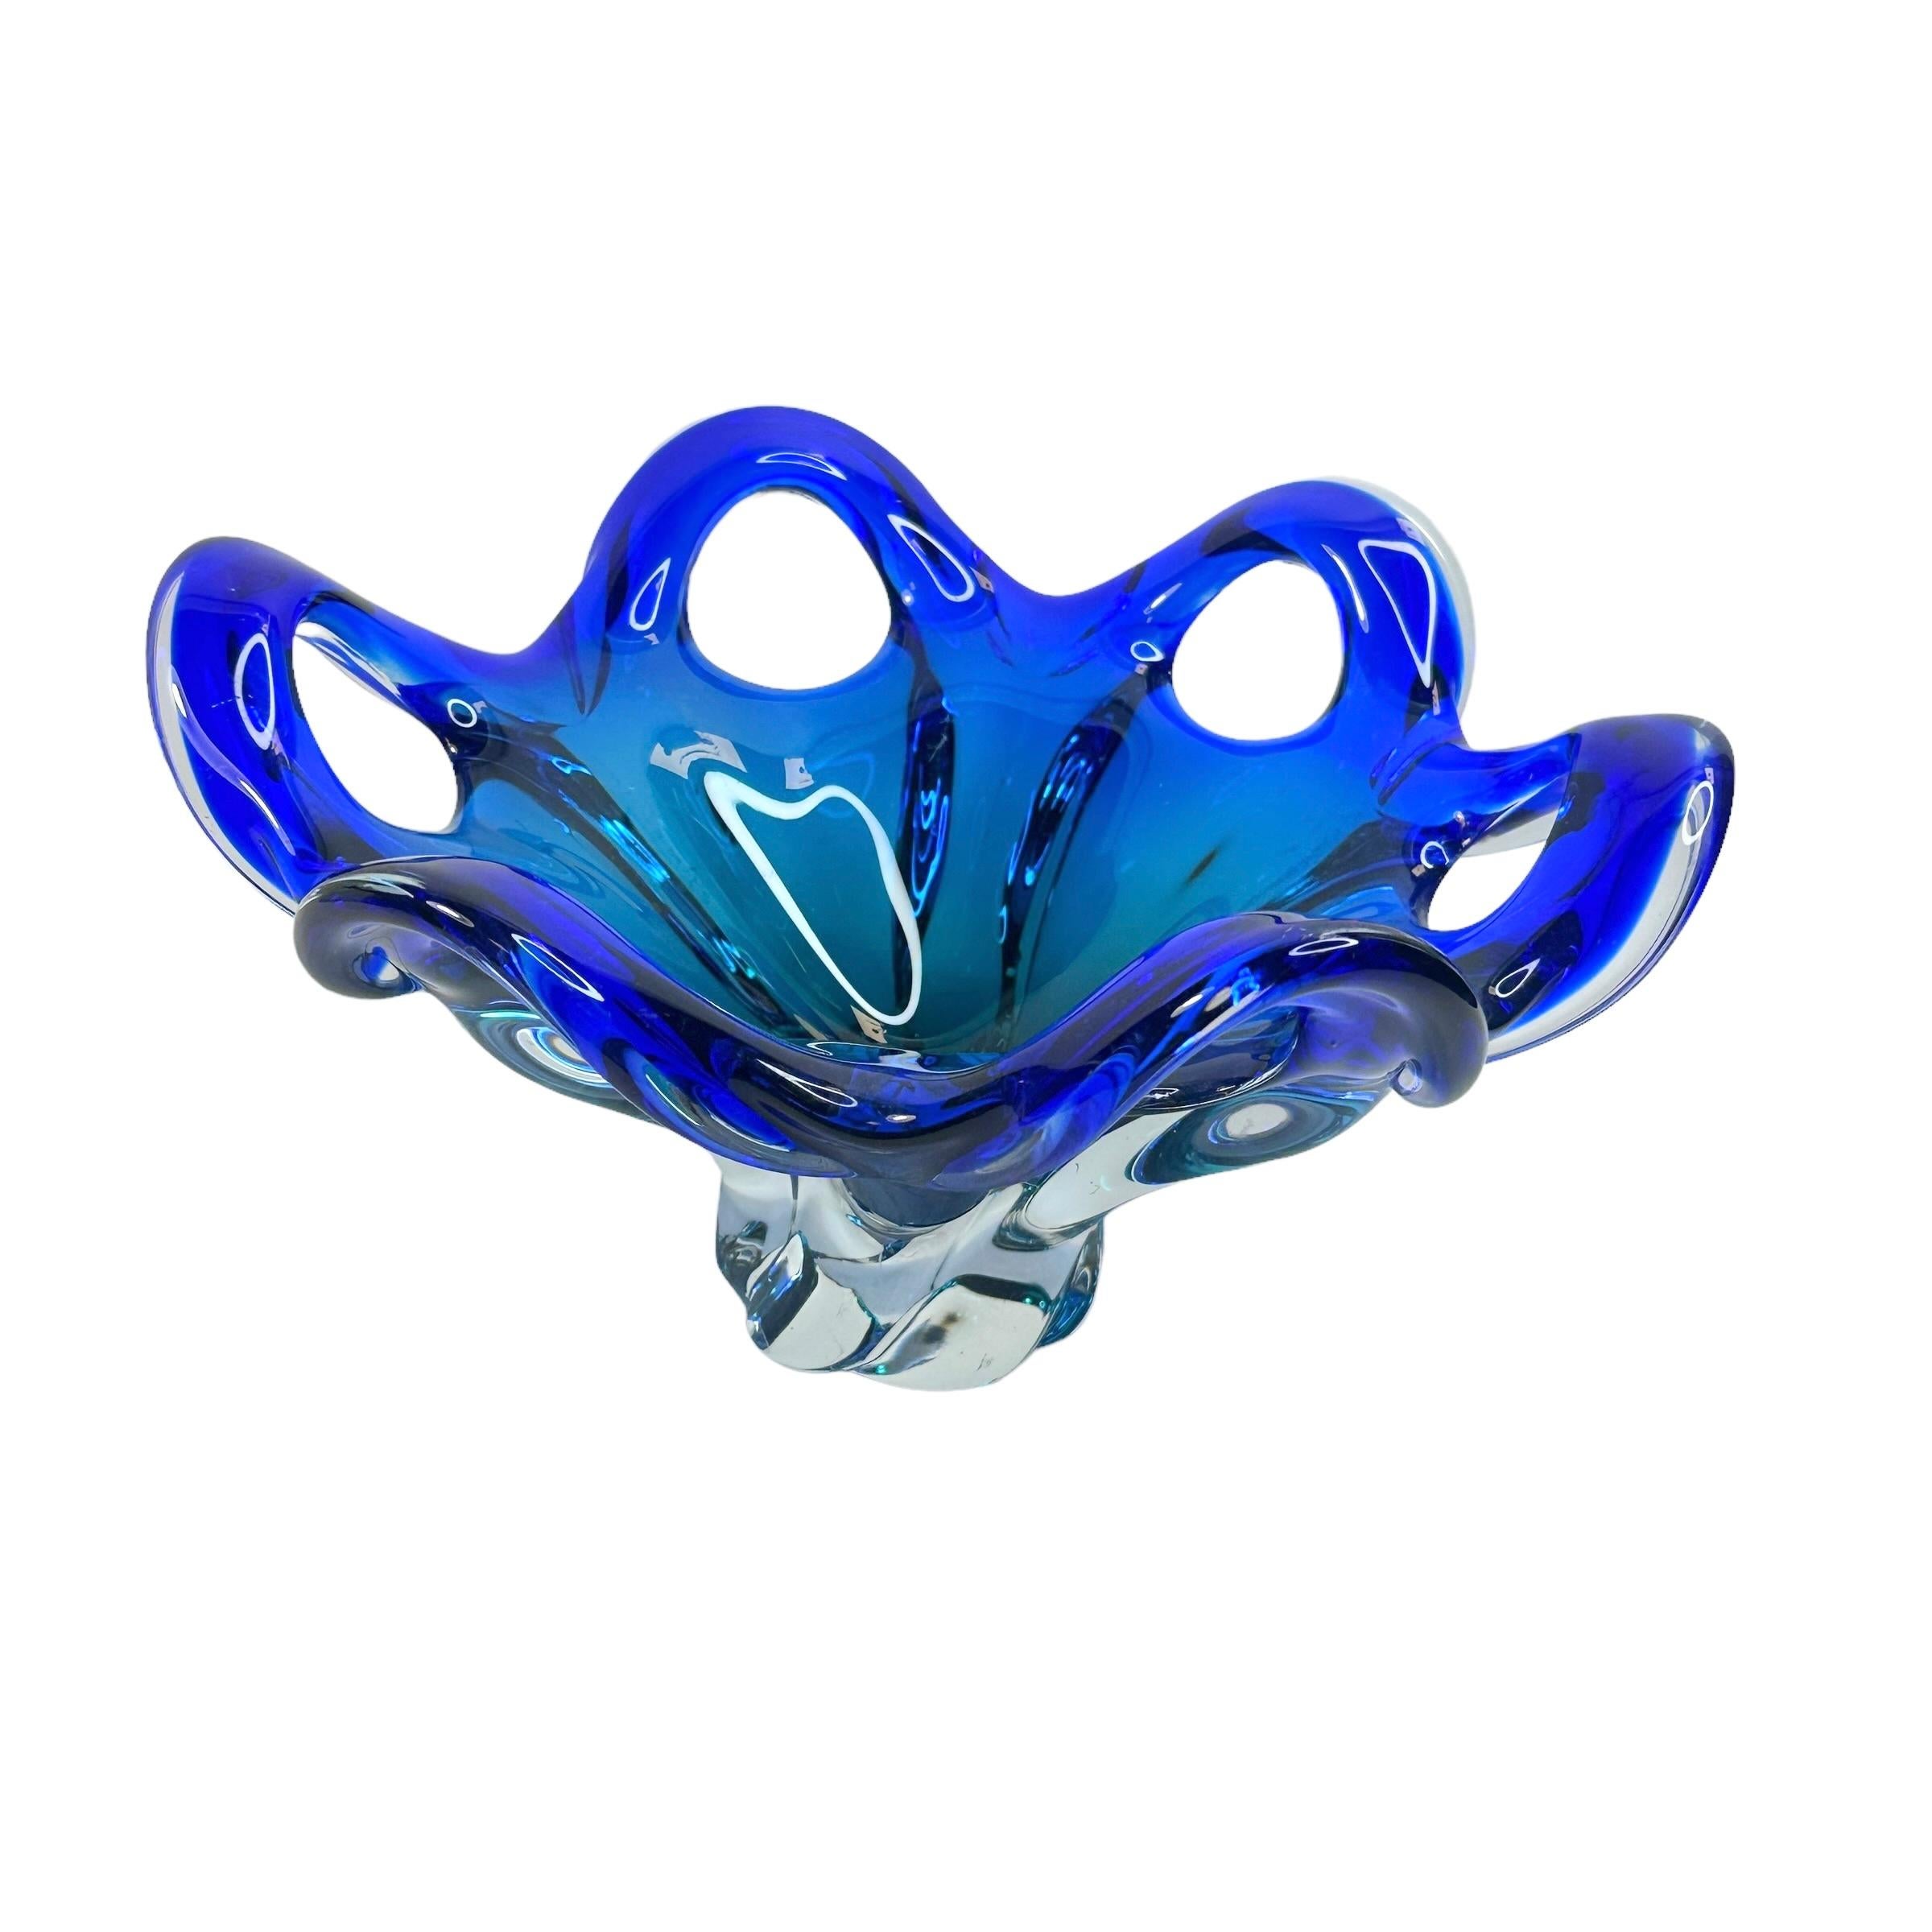 Stunning Murano Art Glass Bowl Catchall Blue and Clear, Vintage, Italy, 1970s For Sale 1